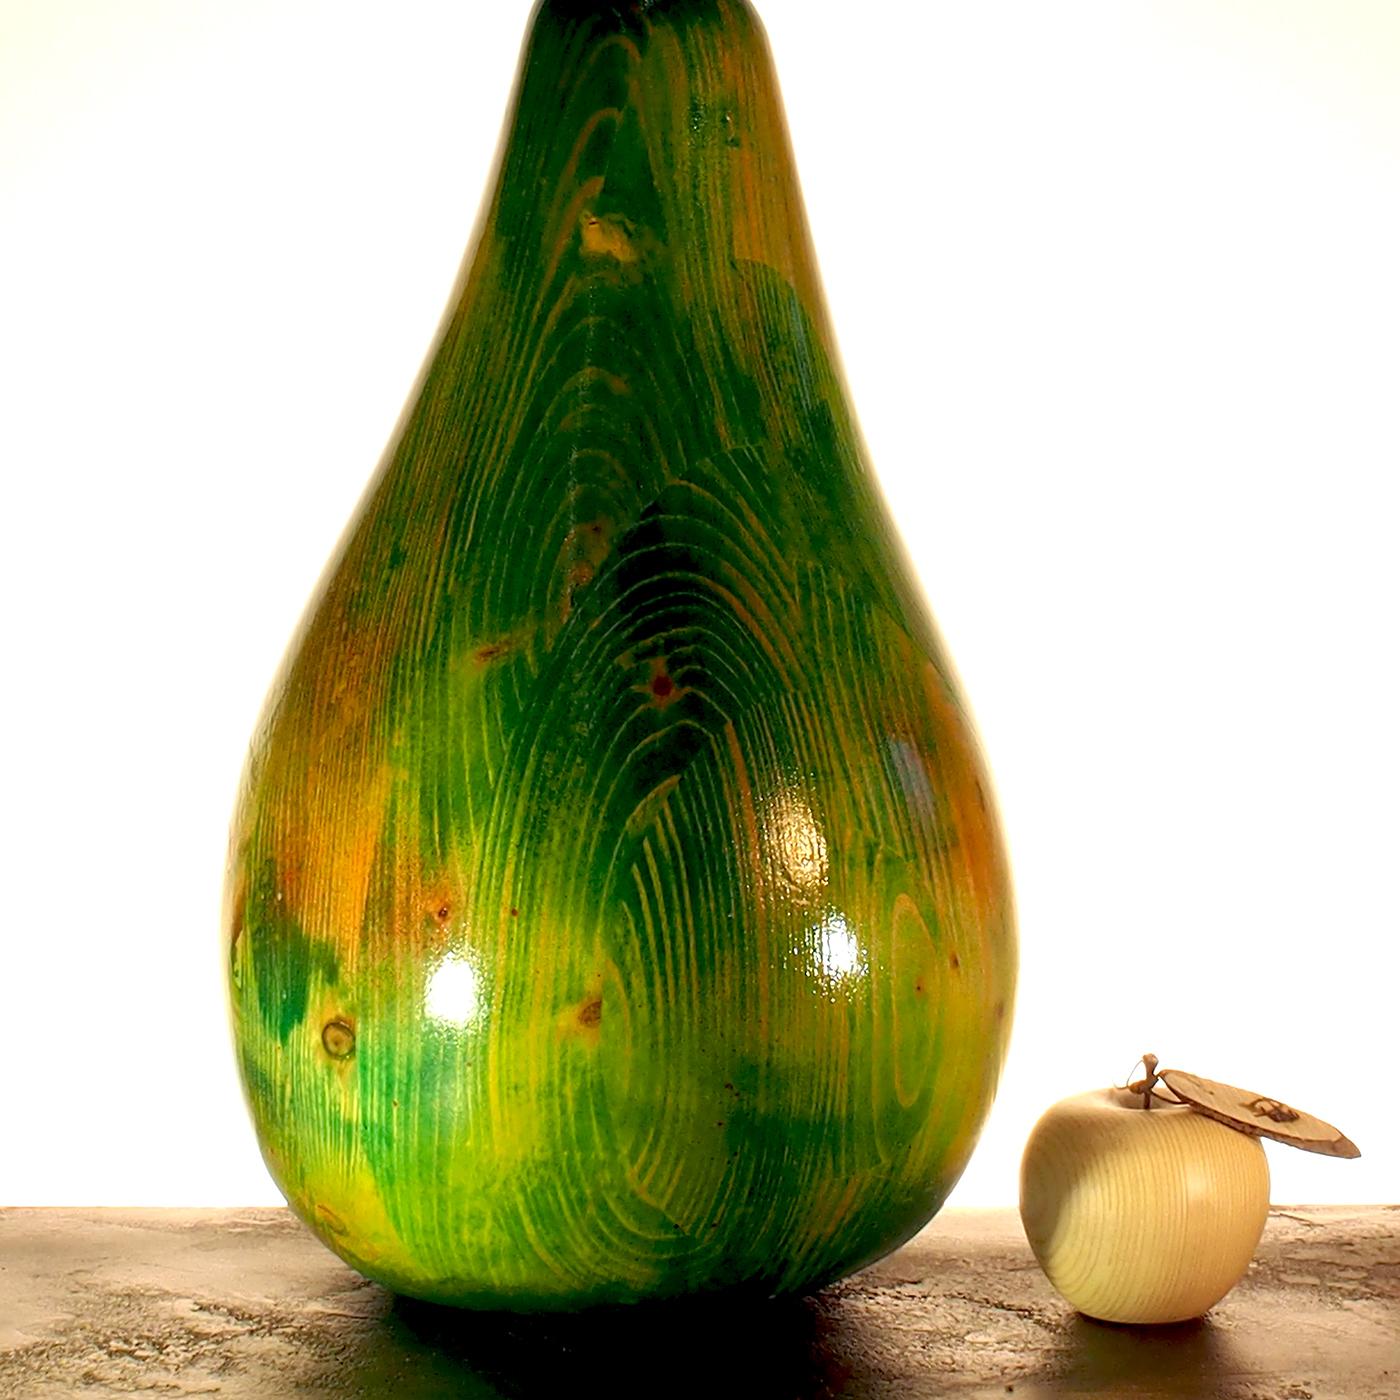 You’ll feel like sinking your teeth into this shiny green pear sculpture, a unique handmade piece by artisan Pietro Arnoldi. This sculpture was made from solid fir wood and its stem is an antique nail. Shaped with a chainsaw and polished by hand,